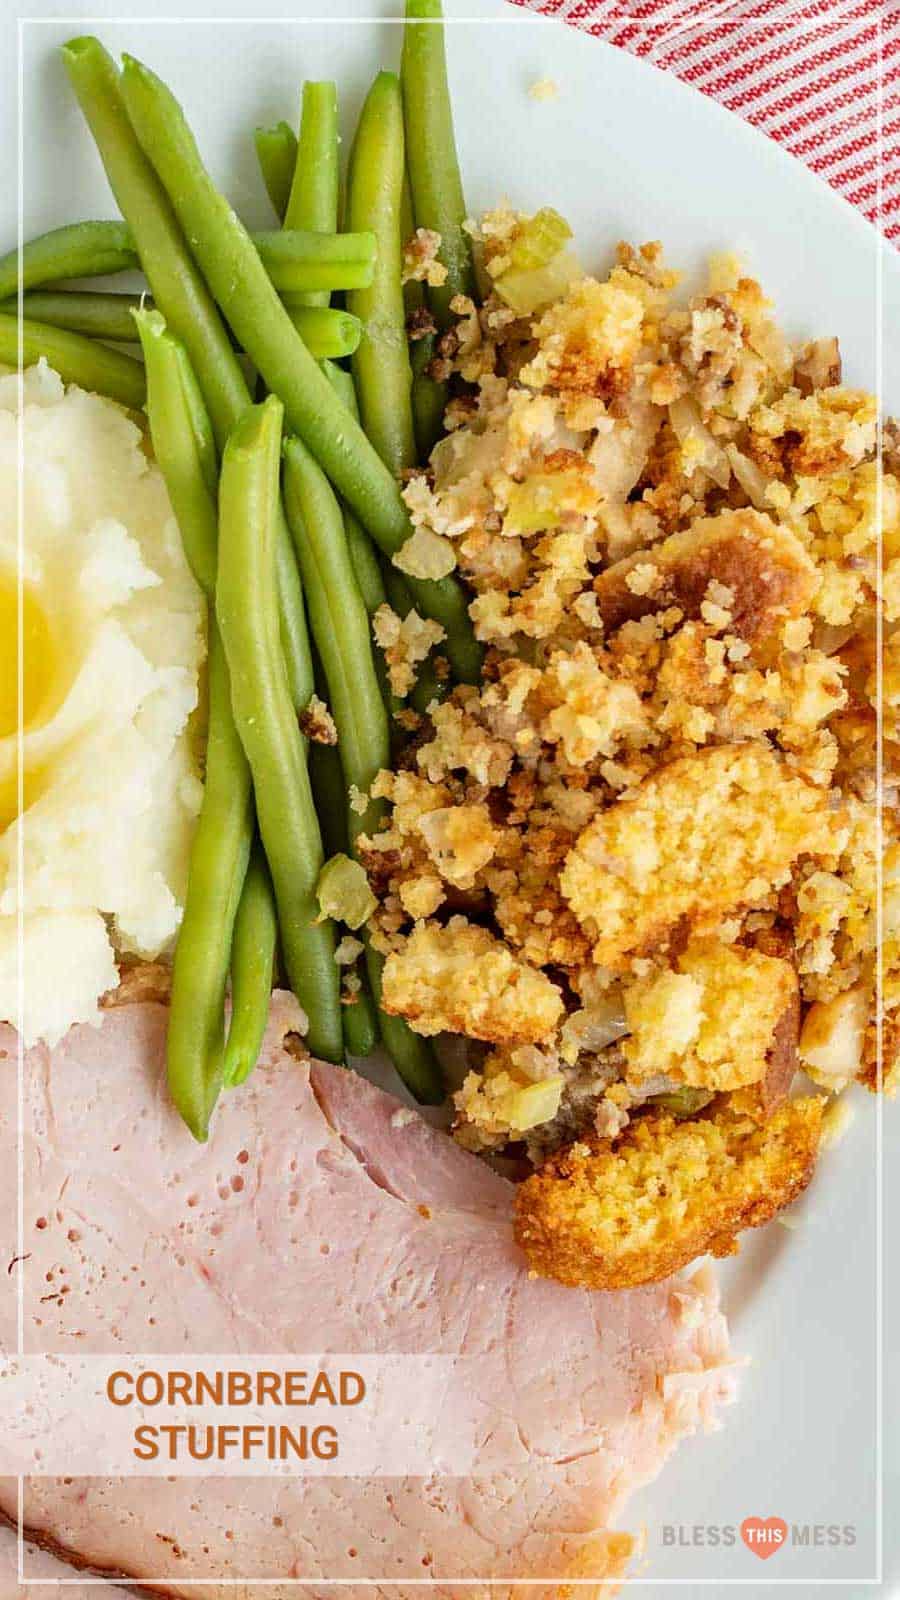 Cornbread stuffing is a crumbly and flavor-packed holiday side dish that's simple to prepare and delicious to enjoy! With sausage, onion, apple, and celery to complete it, this cornbread stuffing is chock-full of fall flavors and is majorly easy to whip up as a side for your holiday feast. #stuffing #dressing #cornbreadstuffing #cornbreaddressing #cornbread #thanksgivingsides #thanksgiving #thanksgivingrecipes #holidayrecipes